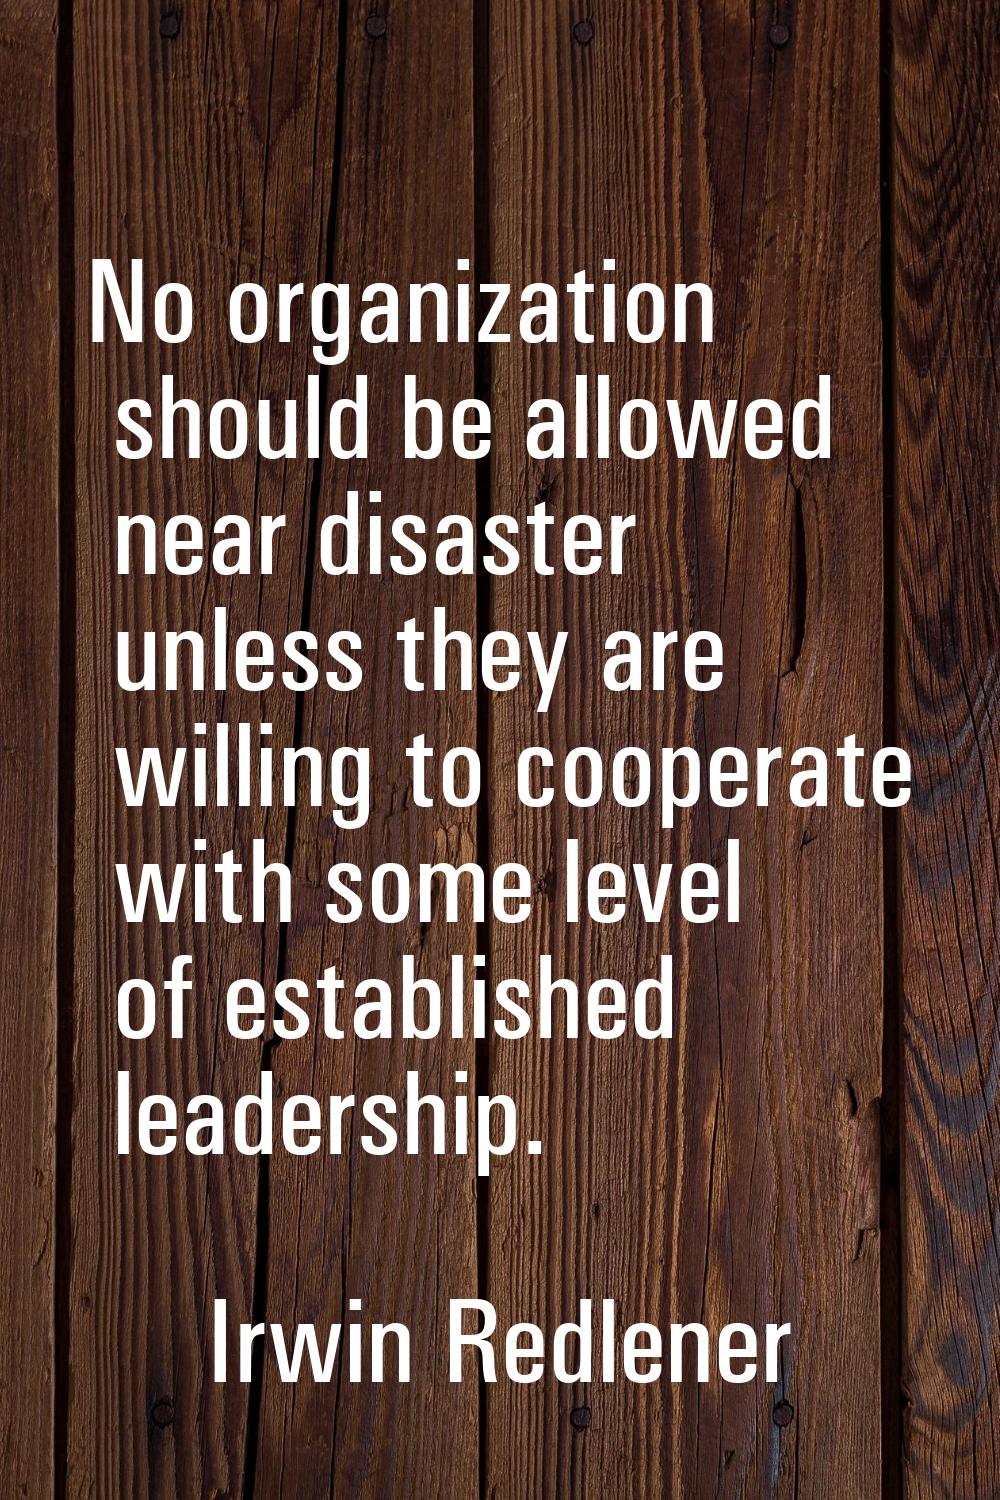 No organization should be allowed near disaster unless they are willing to cooperate with some leve